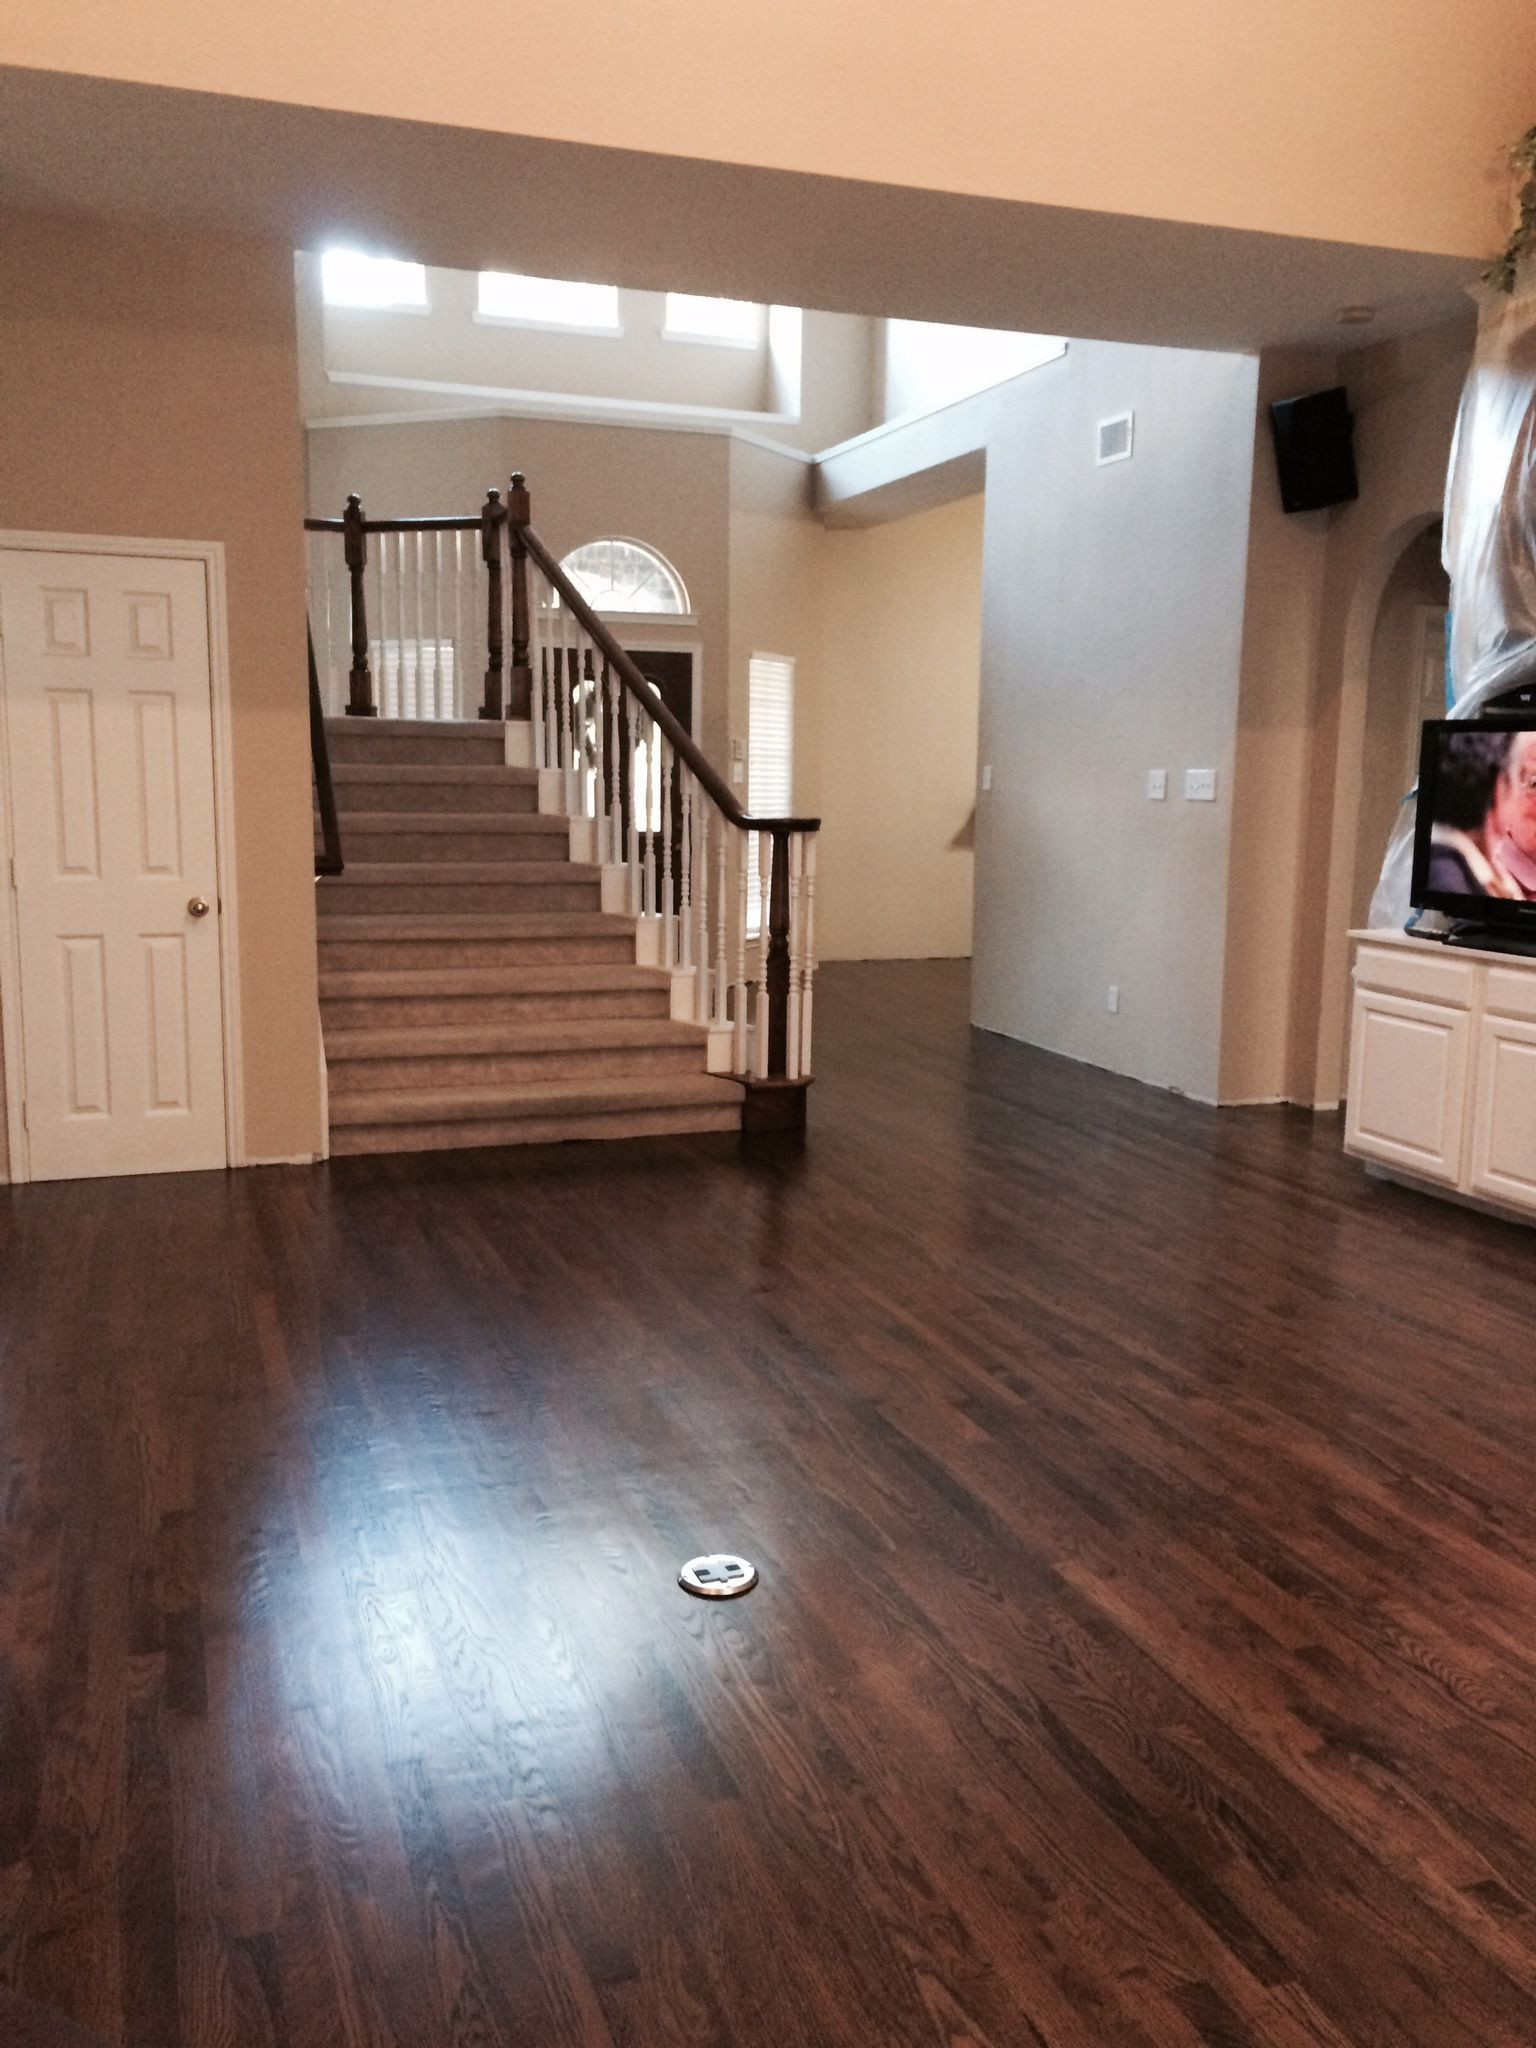 10 Unique How to Restore Hardwood Floors without Refinishing 2024 free download how to restore hardwood floors without refinishing of dark walnut stain on white oak hardwood remodel 1floors in 2018 in dark walnut stain on white oak hardwood walnut hardwood flooring hard